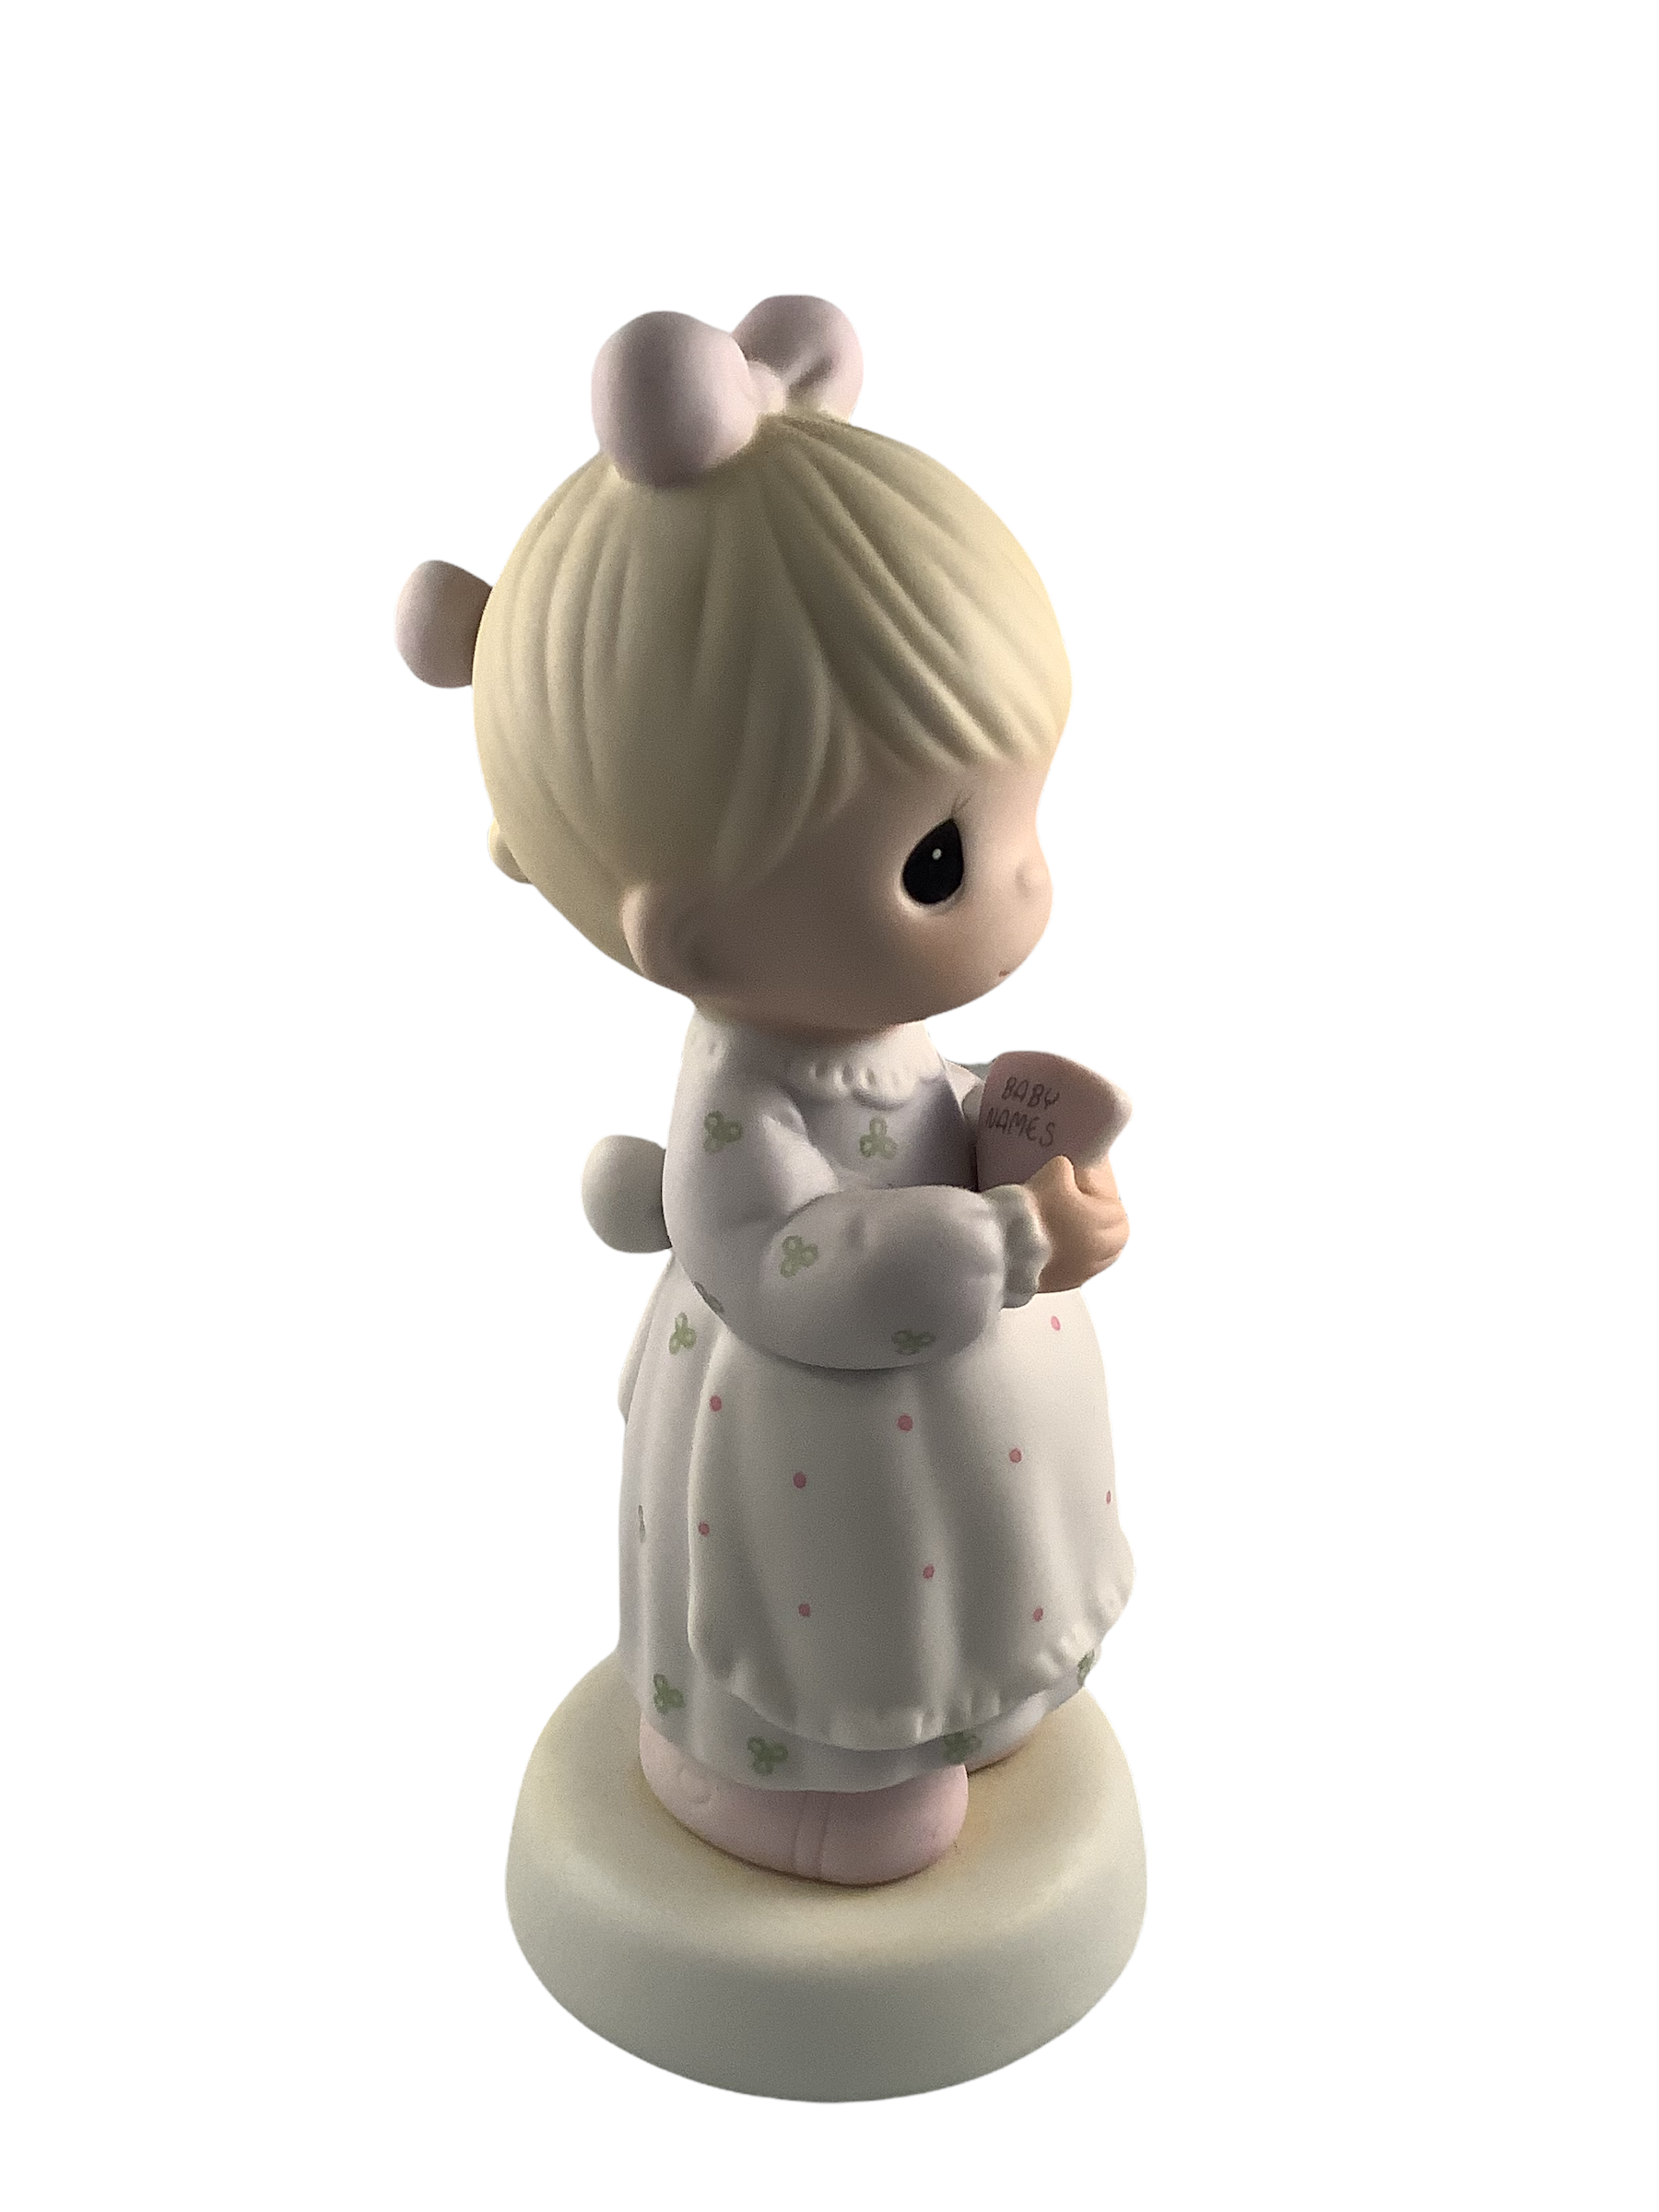 The Good Lord Always Delivers - Precious Moment Figurine